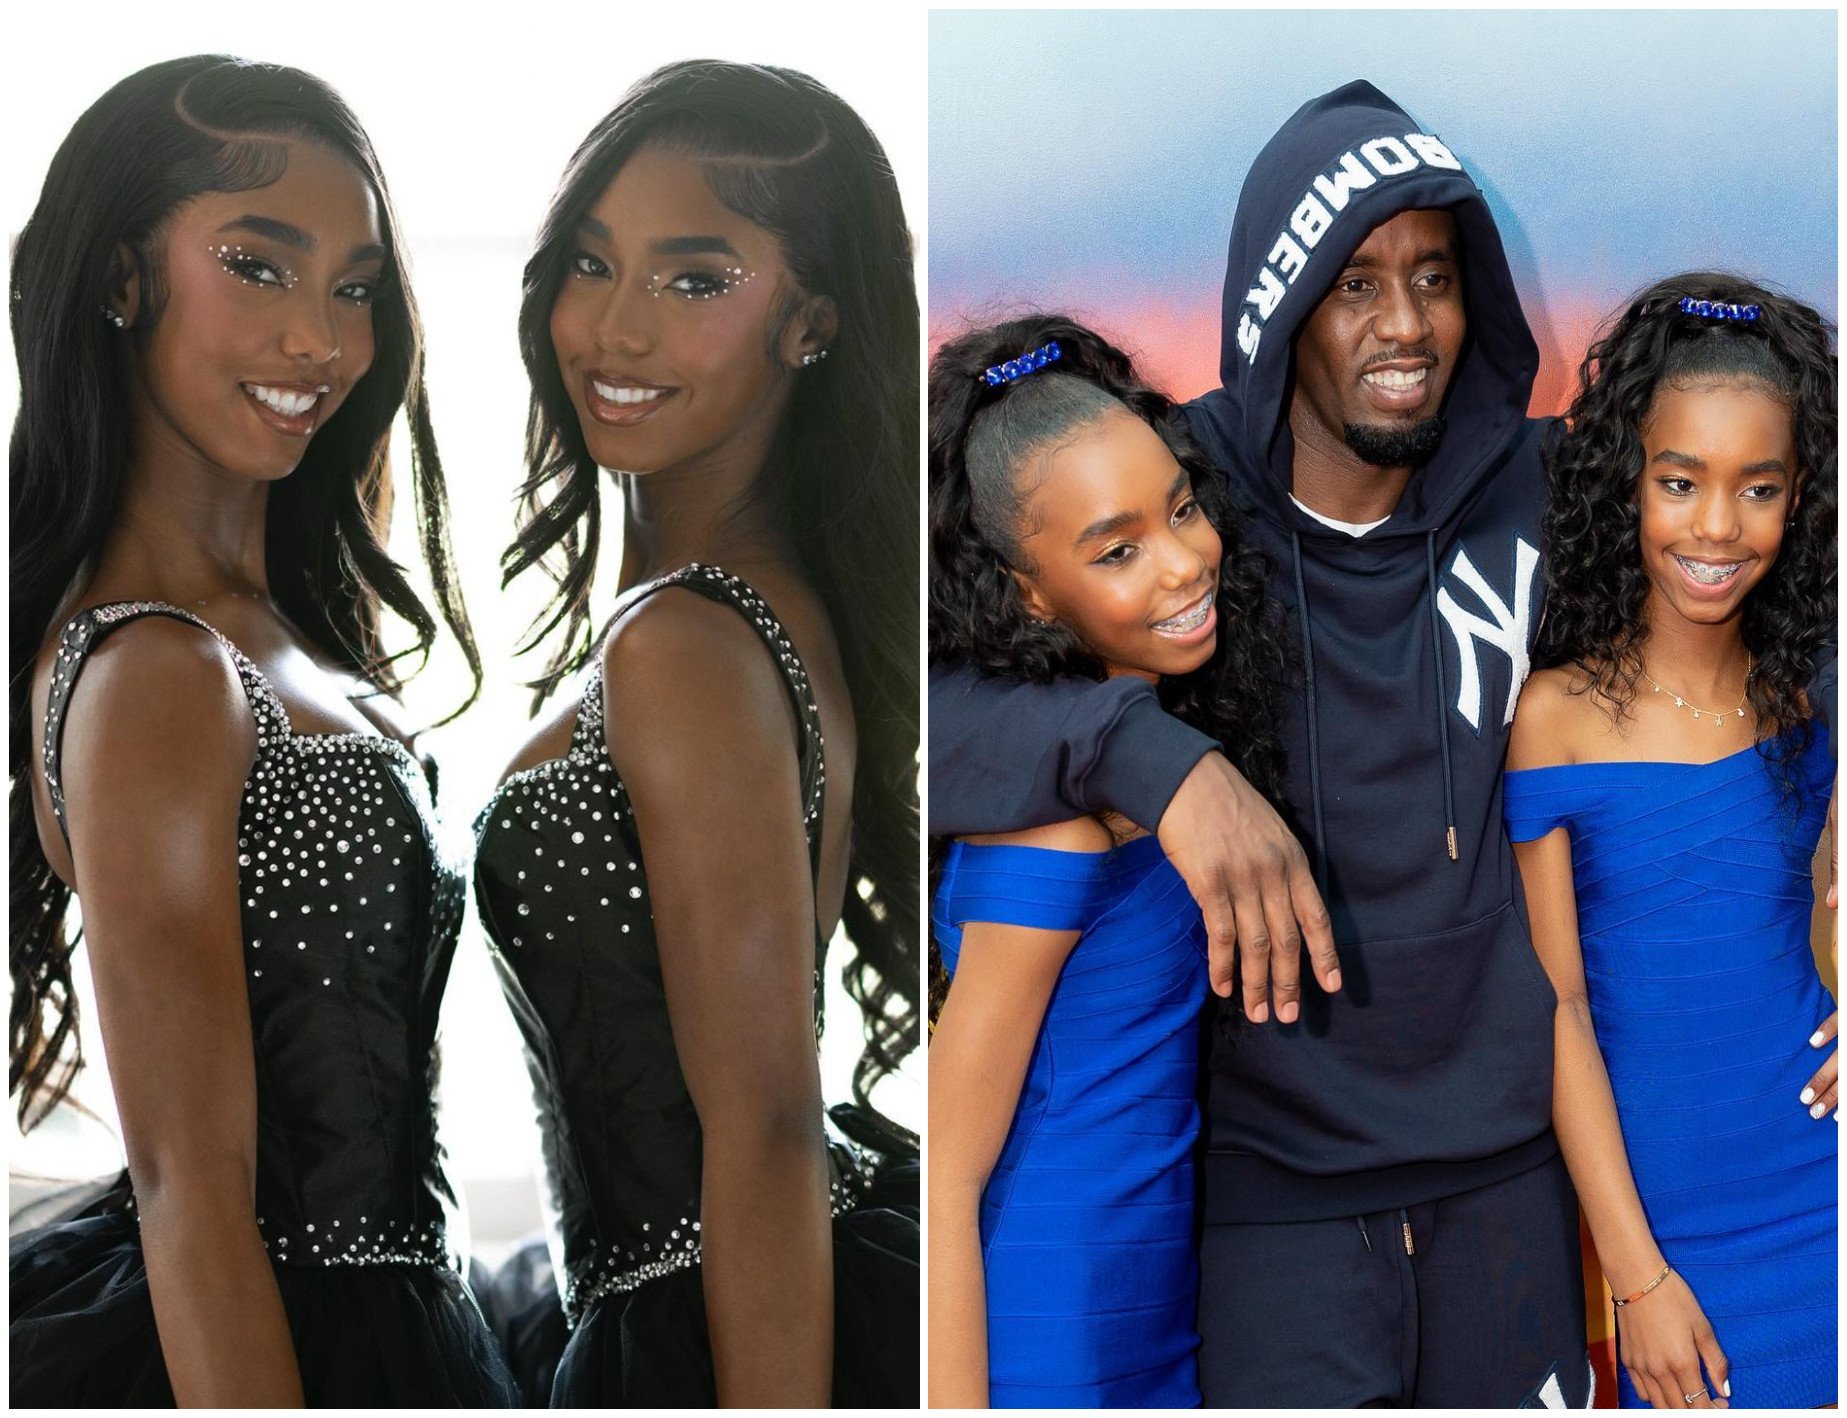 The Combs twins D’Lila and Jessie Combs lost their mum when they were 11, and now their father Diddy is facing allegations of trafficking and abuse. Photos: @the_combs_twins/Instagram, Diddy/Facebook